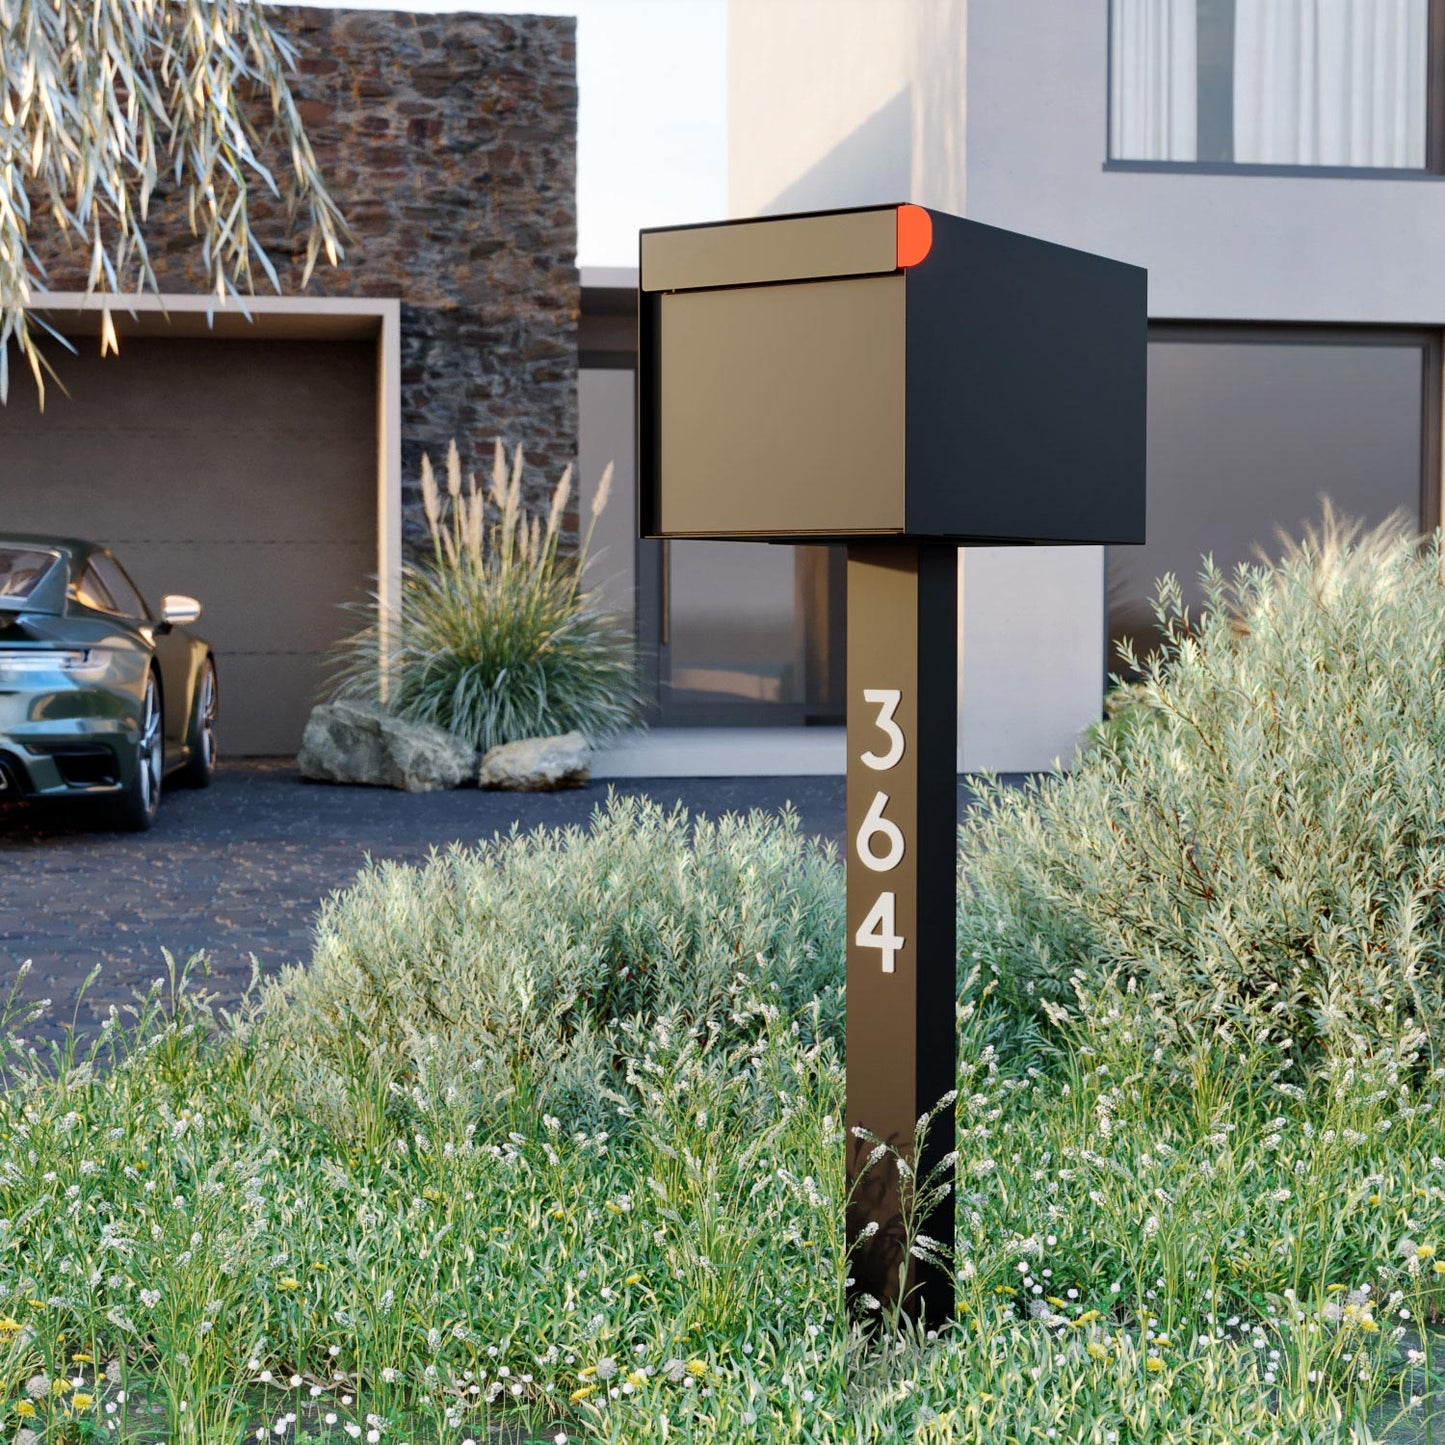 TOWN SQUARE Mailbox by Bravios - Large capacity mailbox with post - Black